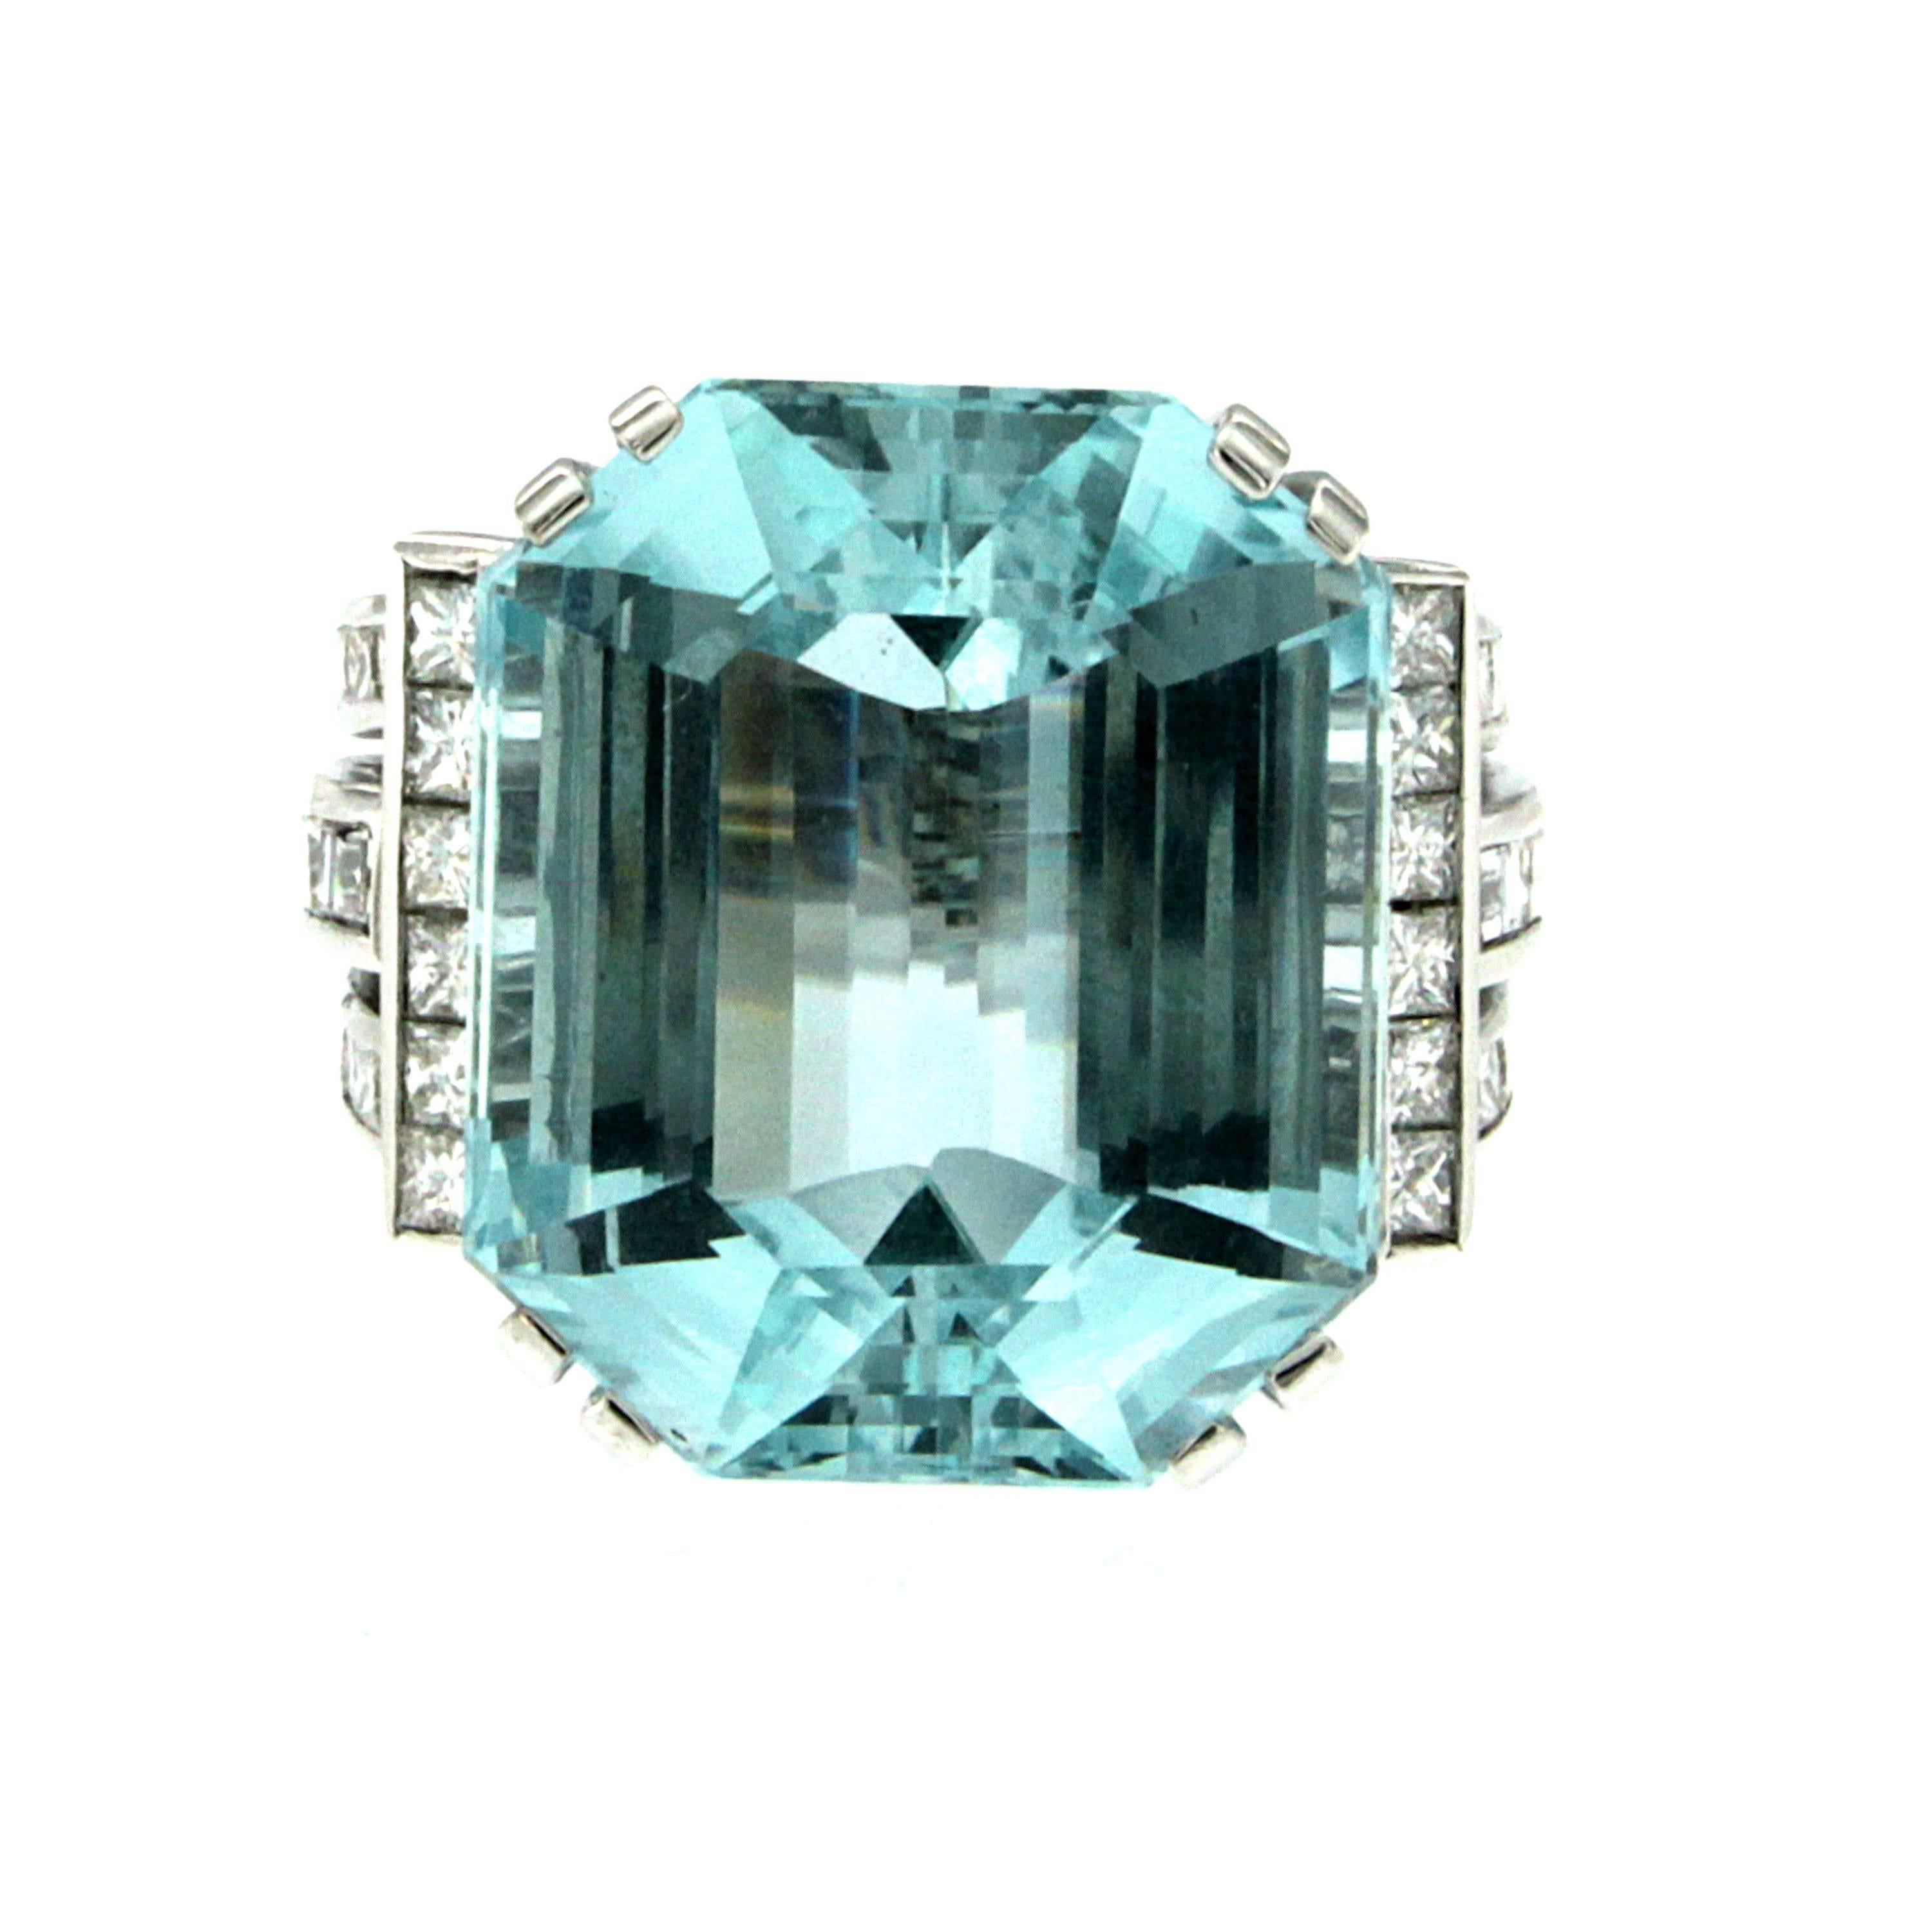 Stunning Aquamarine hand crafted Ring mounted in 18k white gold and set with a natural Certified Brazilian Aquamarine of Beautiful blue color, weighing 42 carats, measurements 23,74 x 19,70 x 13,10 mm and surrounded by 2,79 carats of Princess and